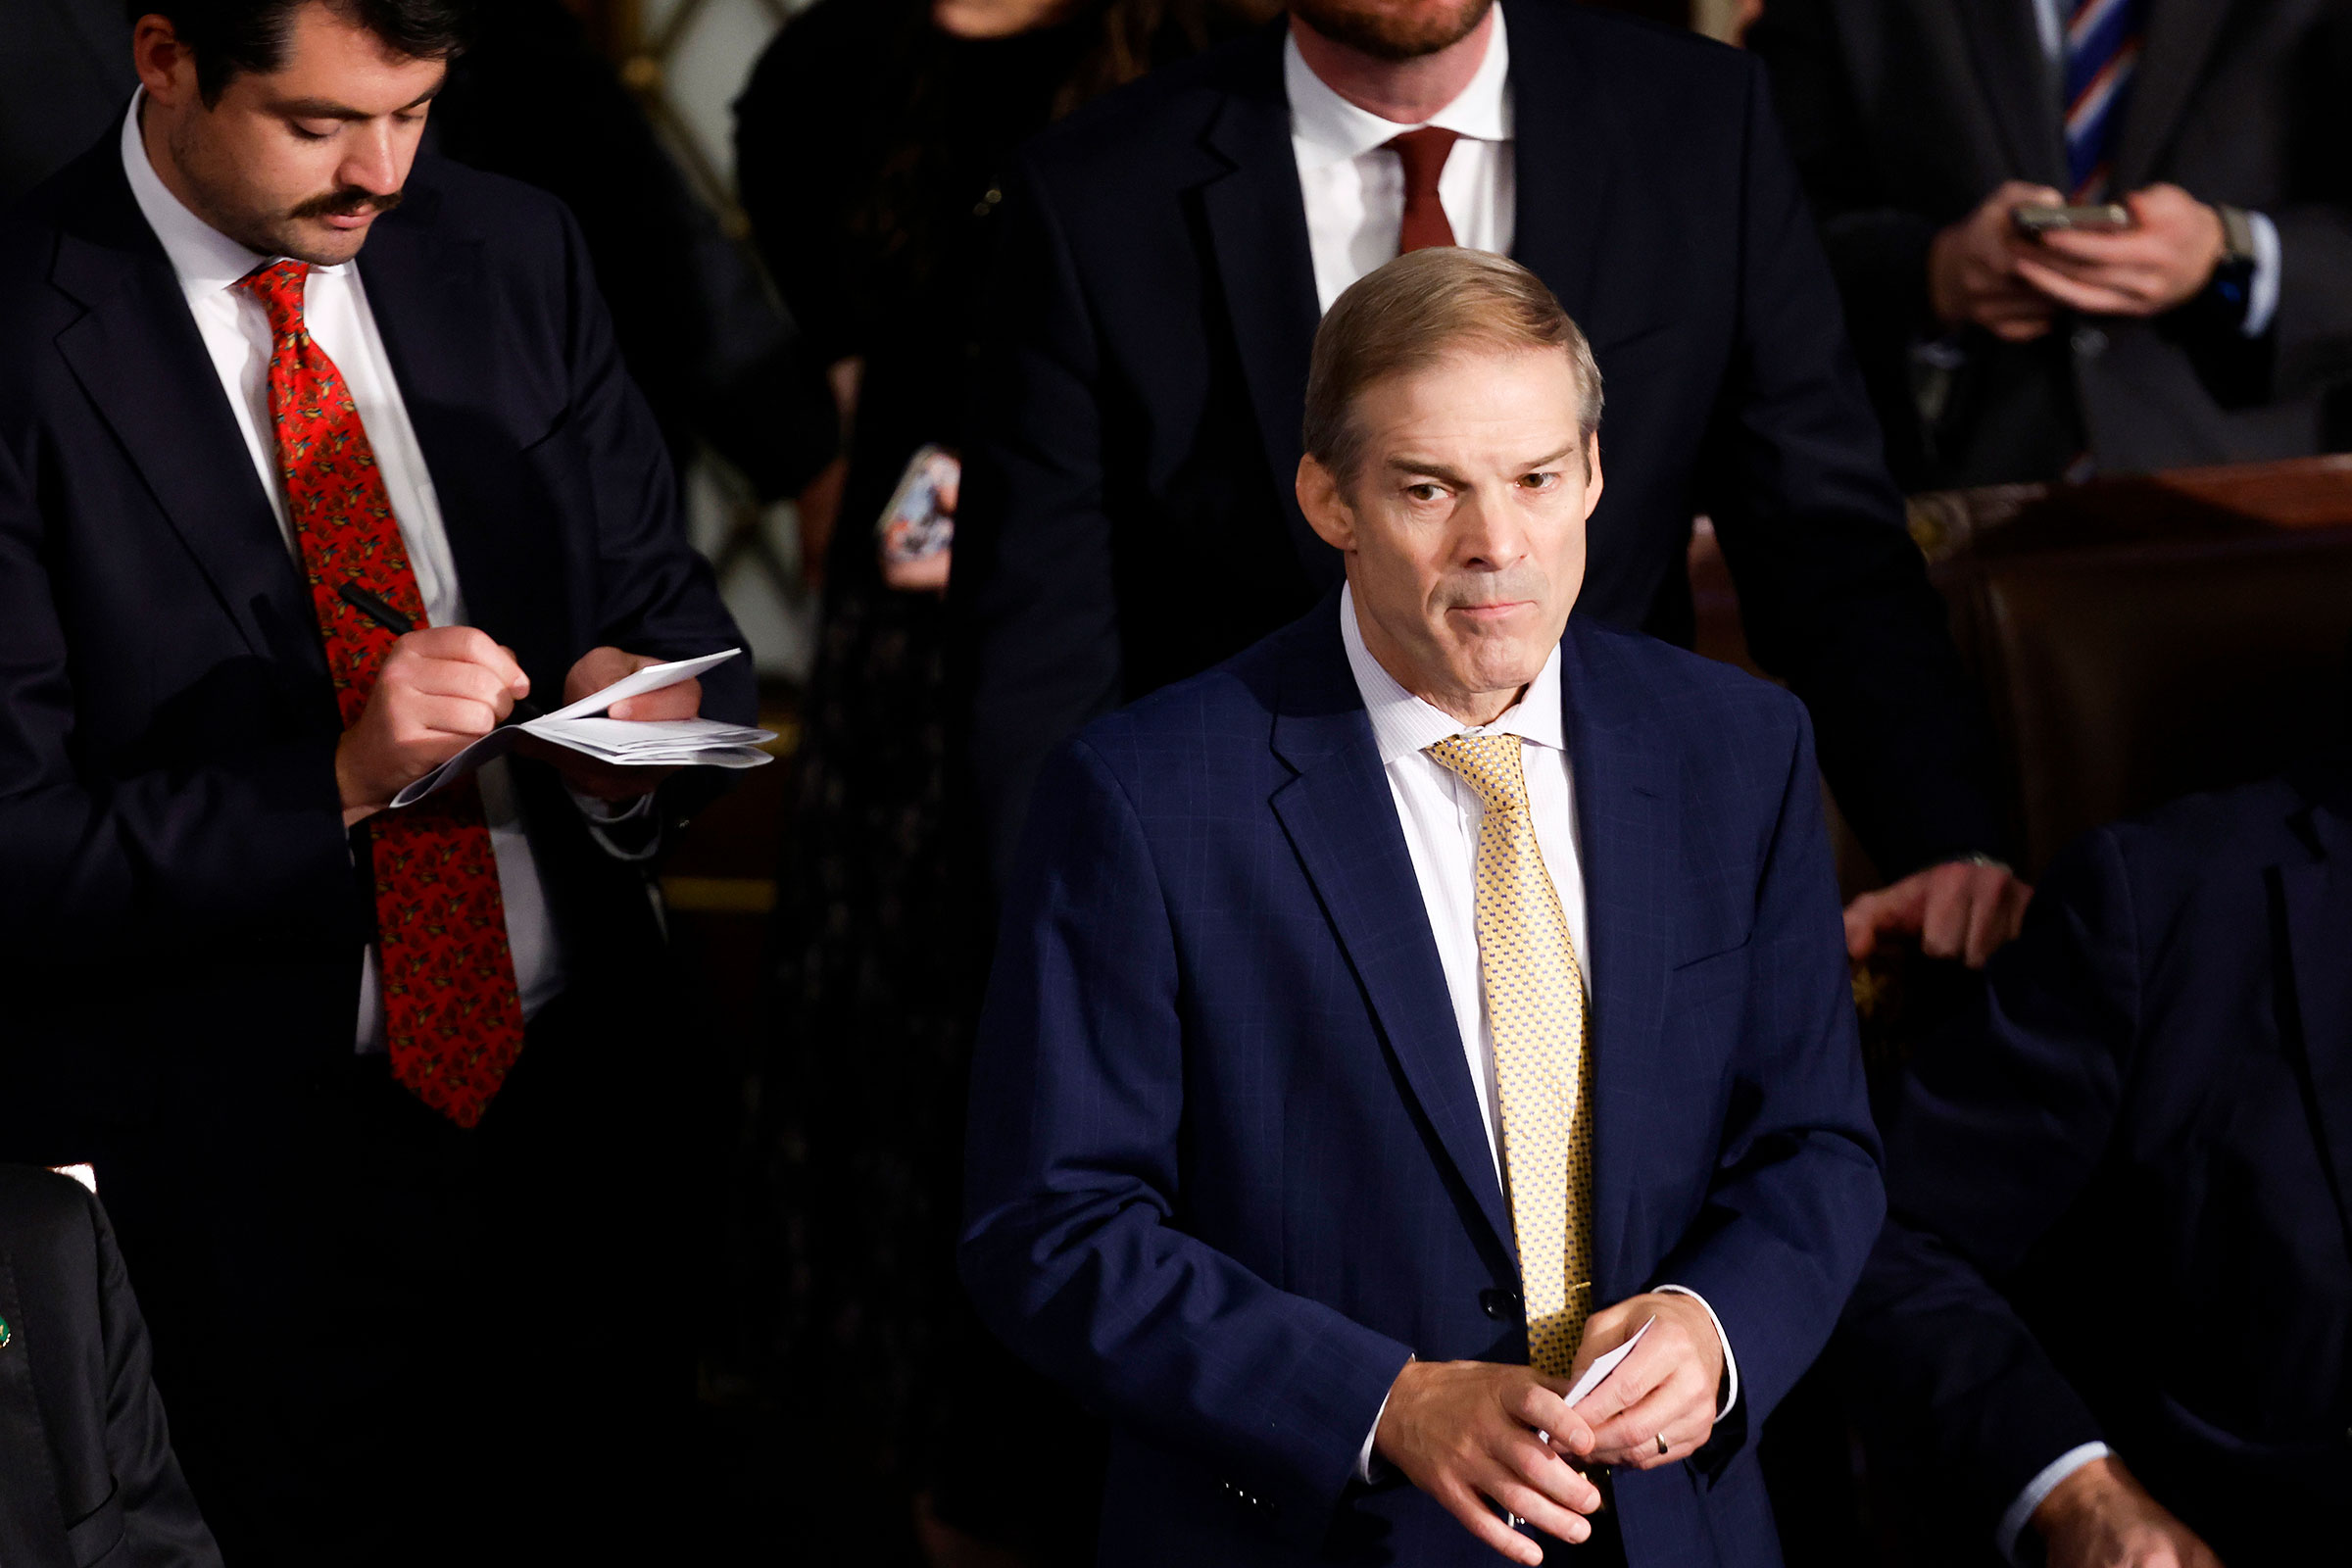 Rep. Jim Jordan on Tuesday as the House of Representatives met to elect a new Speaker of the House at the Capitol in Washington, DC.